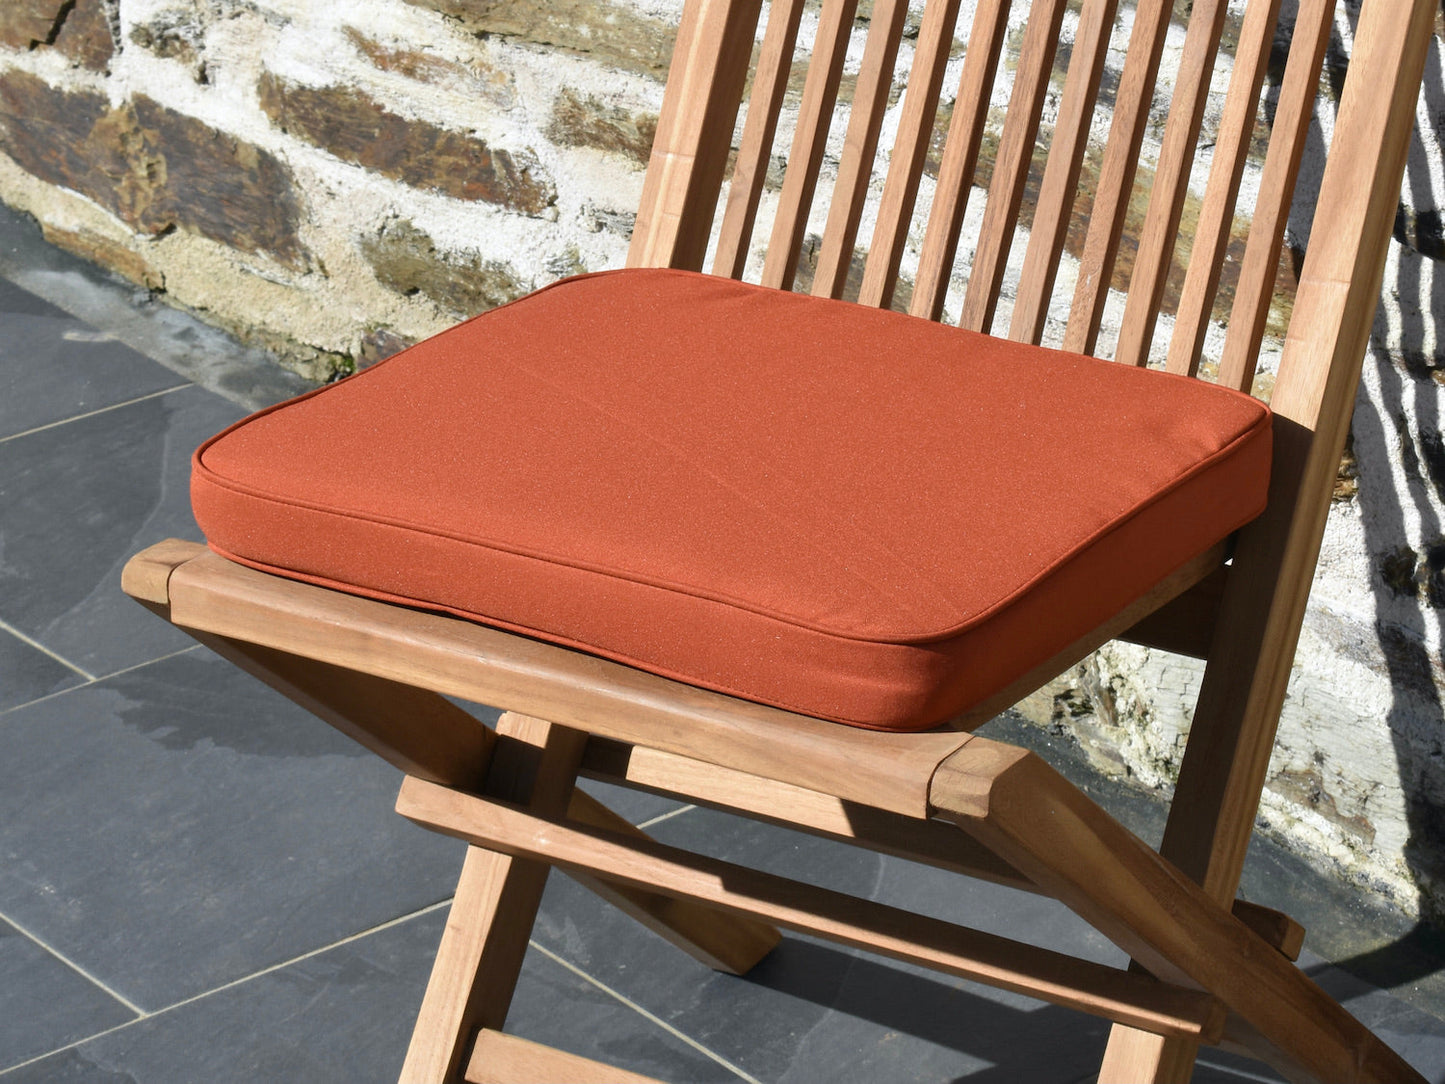 close-up polyester fabric detail for terracotta orange colour small garden seat pad cushion